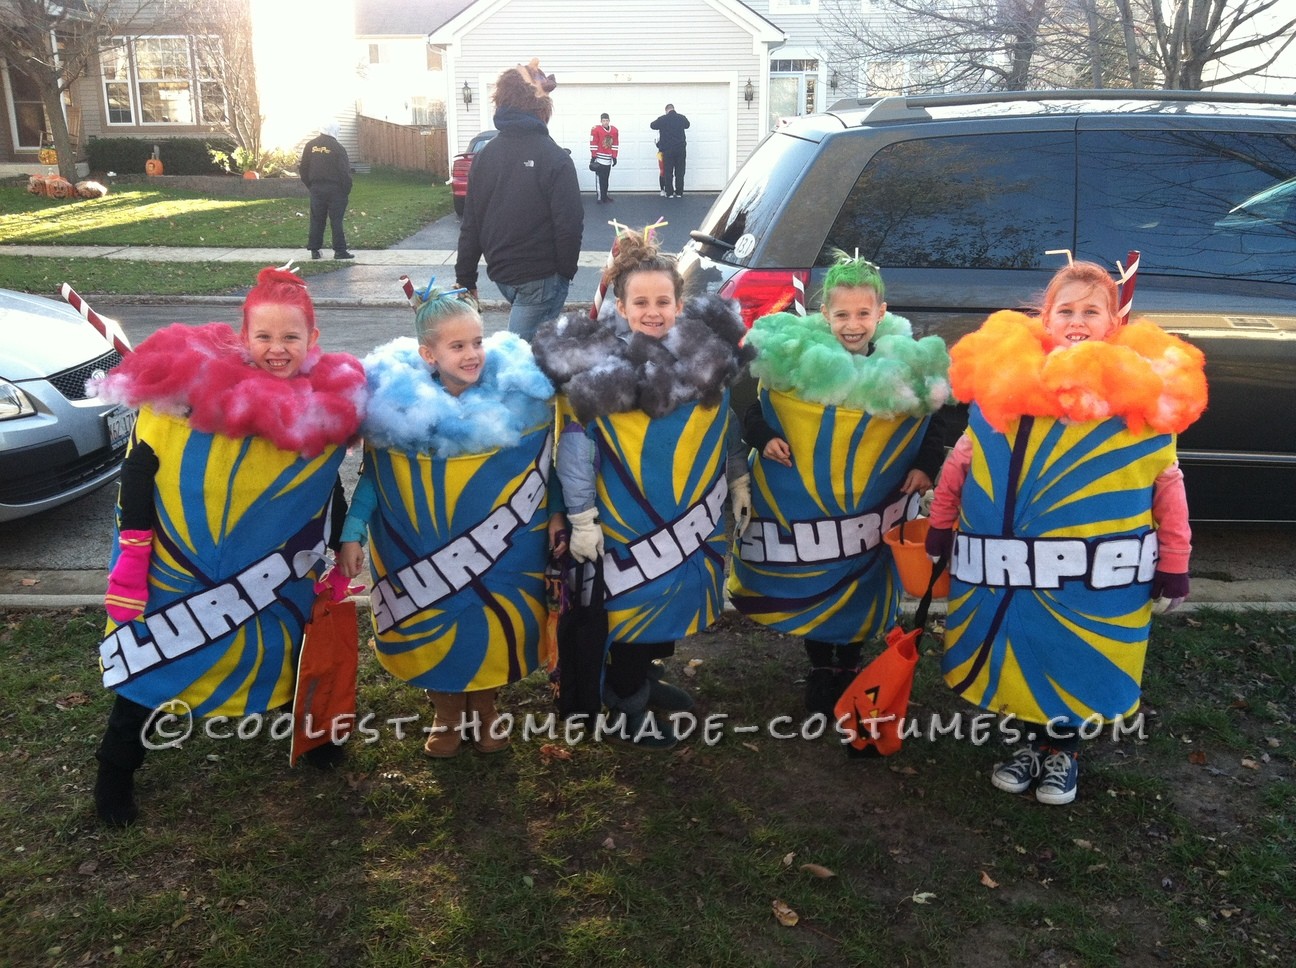 Age Appropriate Group Costume for Little Girls: Slurpees